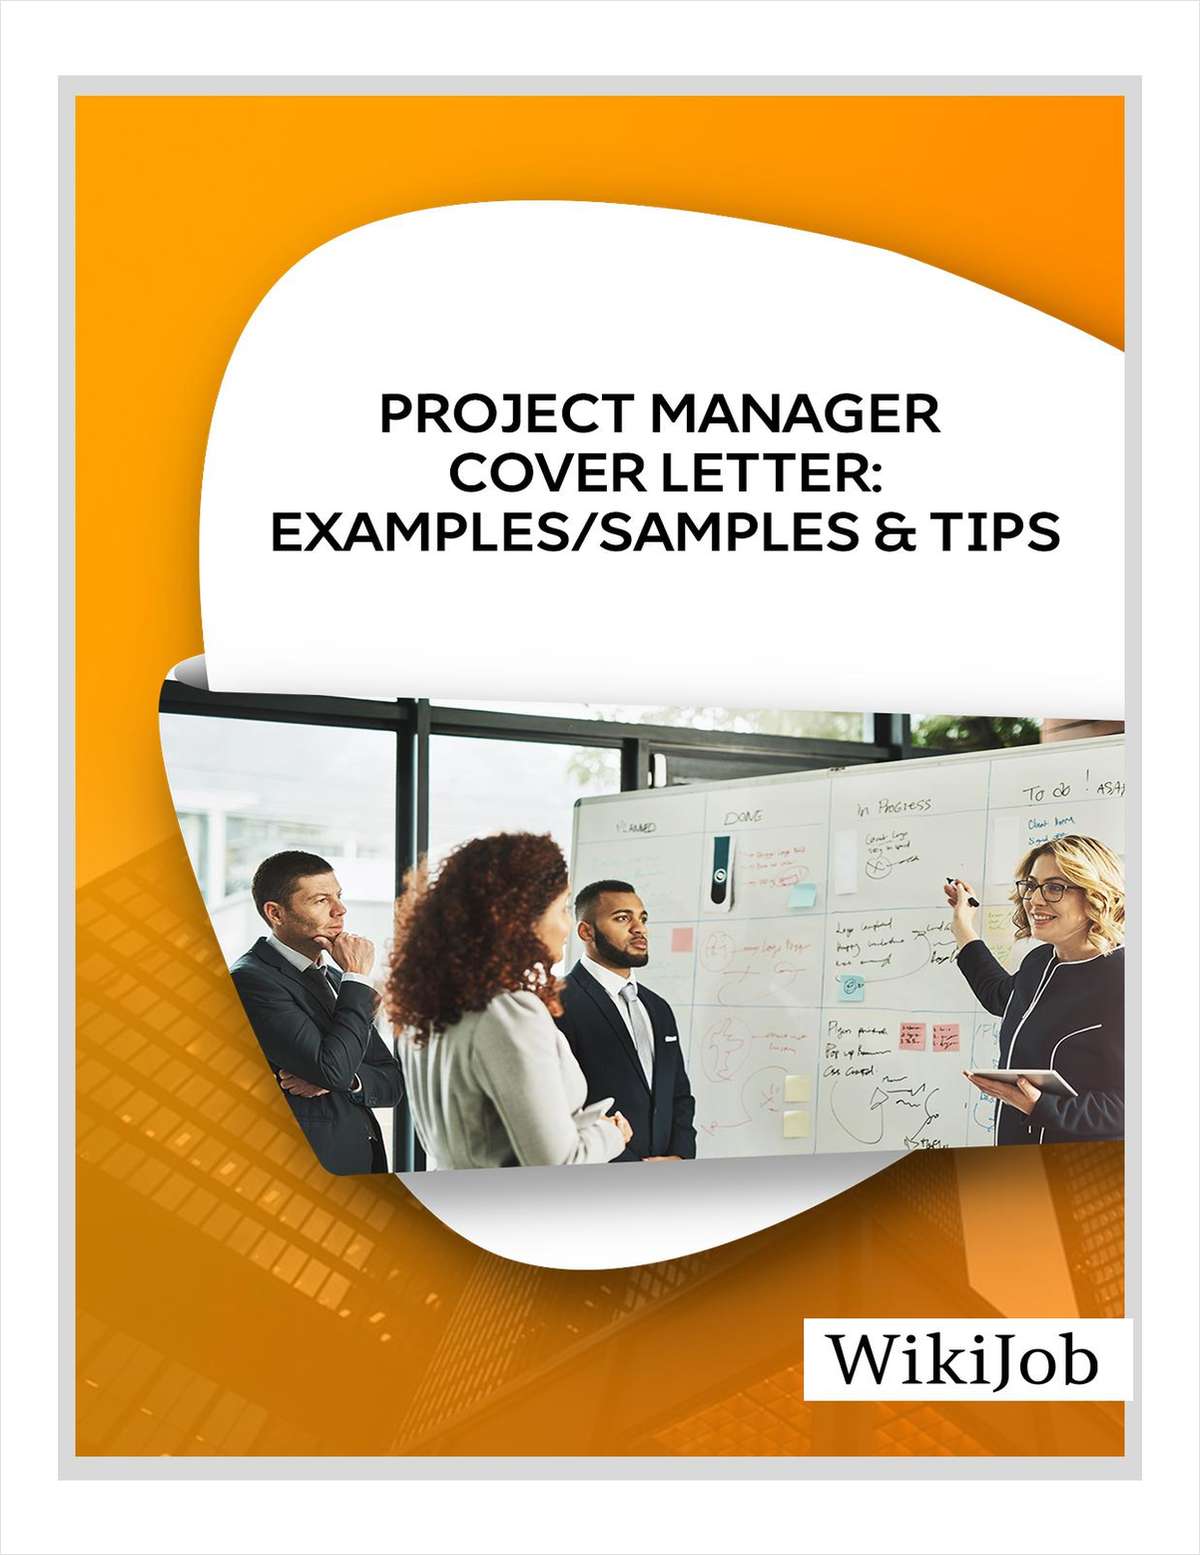 Project Manager Cover Letter: Examples/Samples & Tips